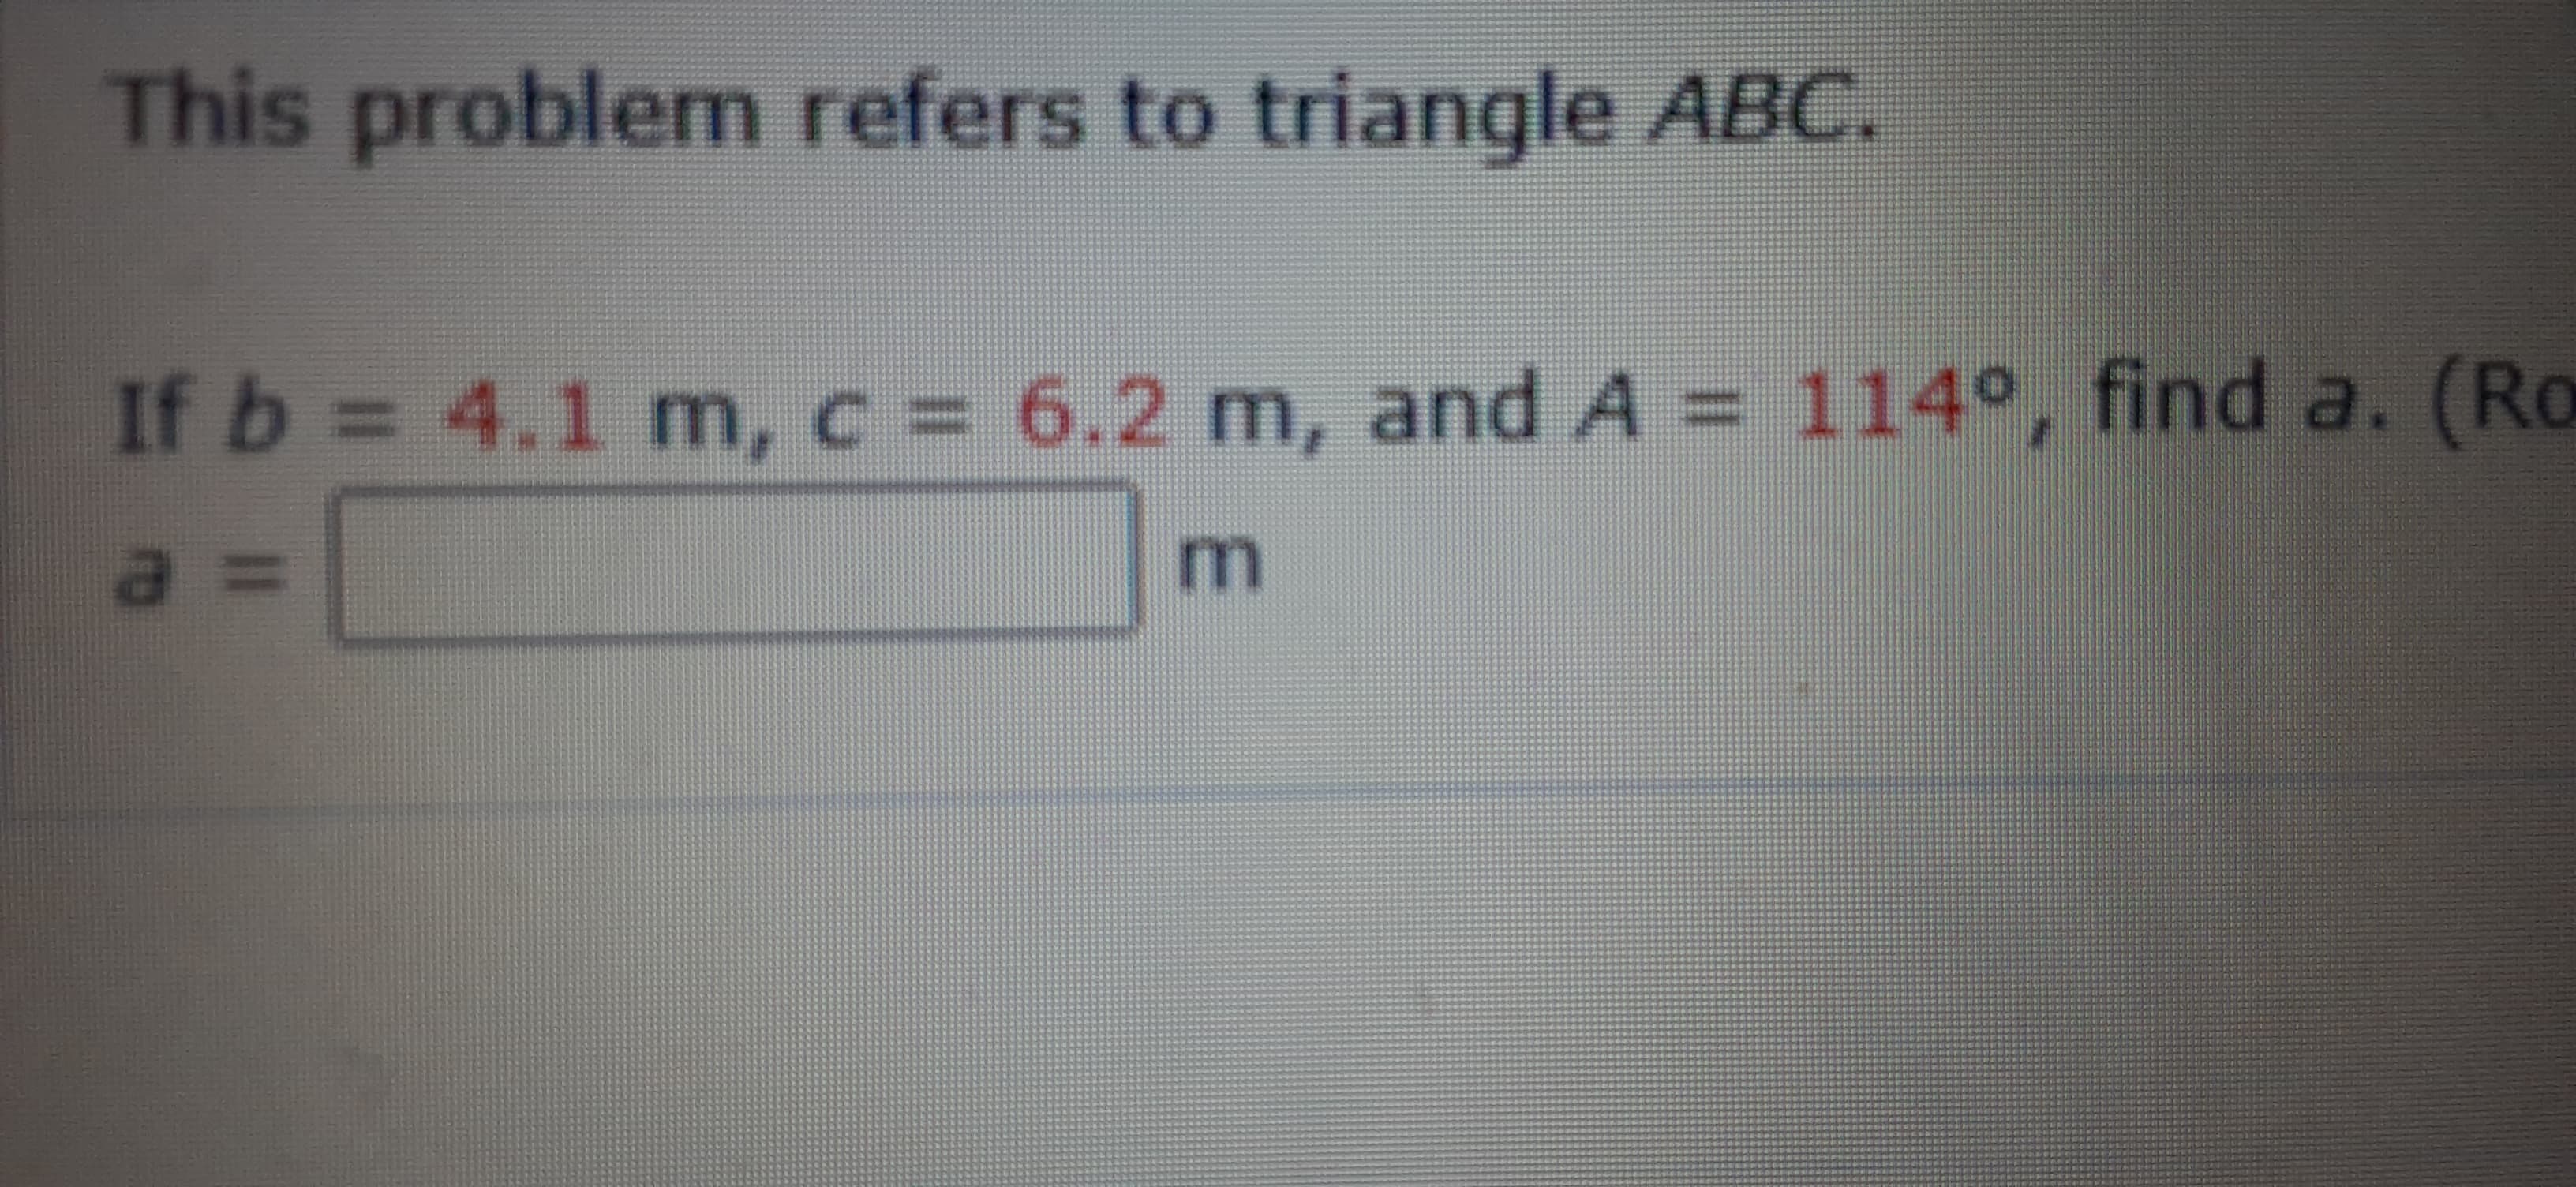 This problem refers to triangle ABC.
If b = 4.1 m, c = 6.2 m, and A = 114°, find a.
a%3D
m
